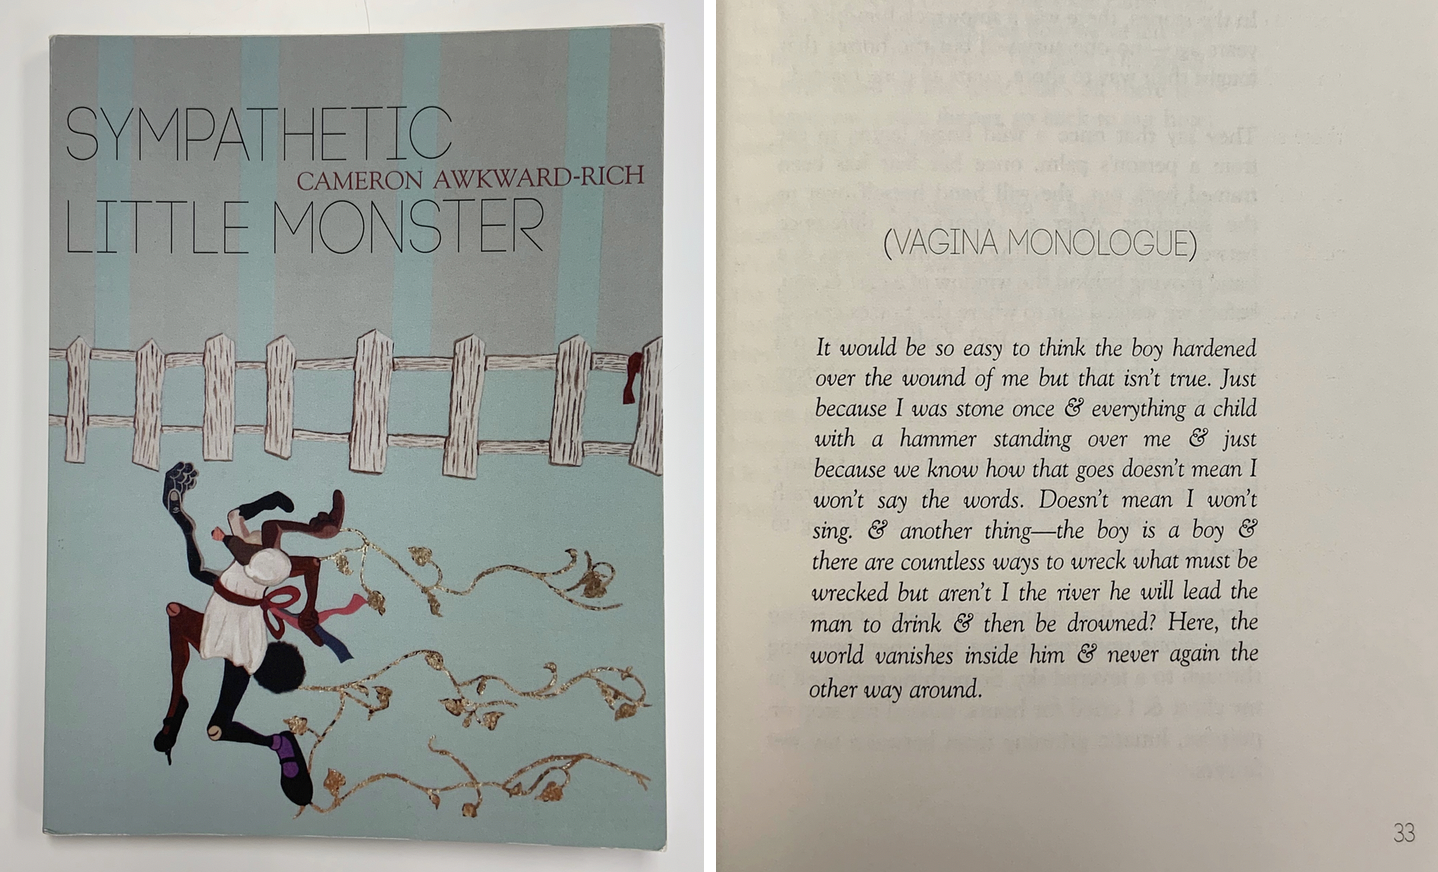 Two juxtaposed images. On the left is the cover of Sympathetic Little Monster by Cameron Awkward-Rich, a small light blue chapbook. On the right is an excerpt from a poem in the volume, titled "(Vagina Monologue)".